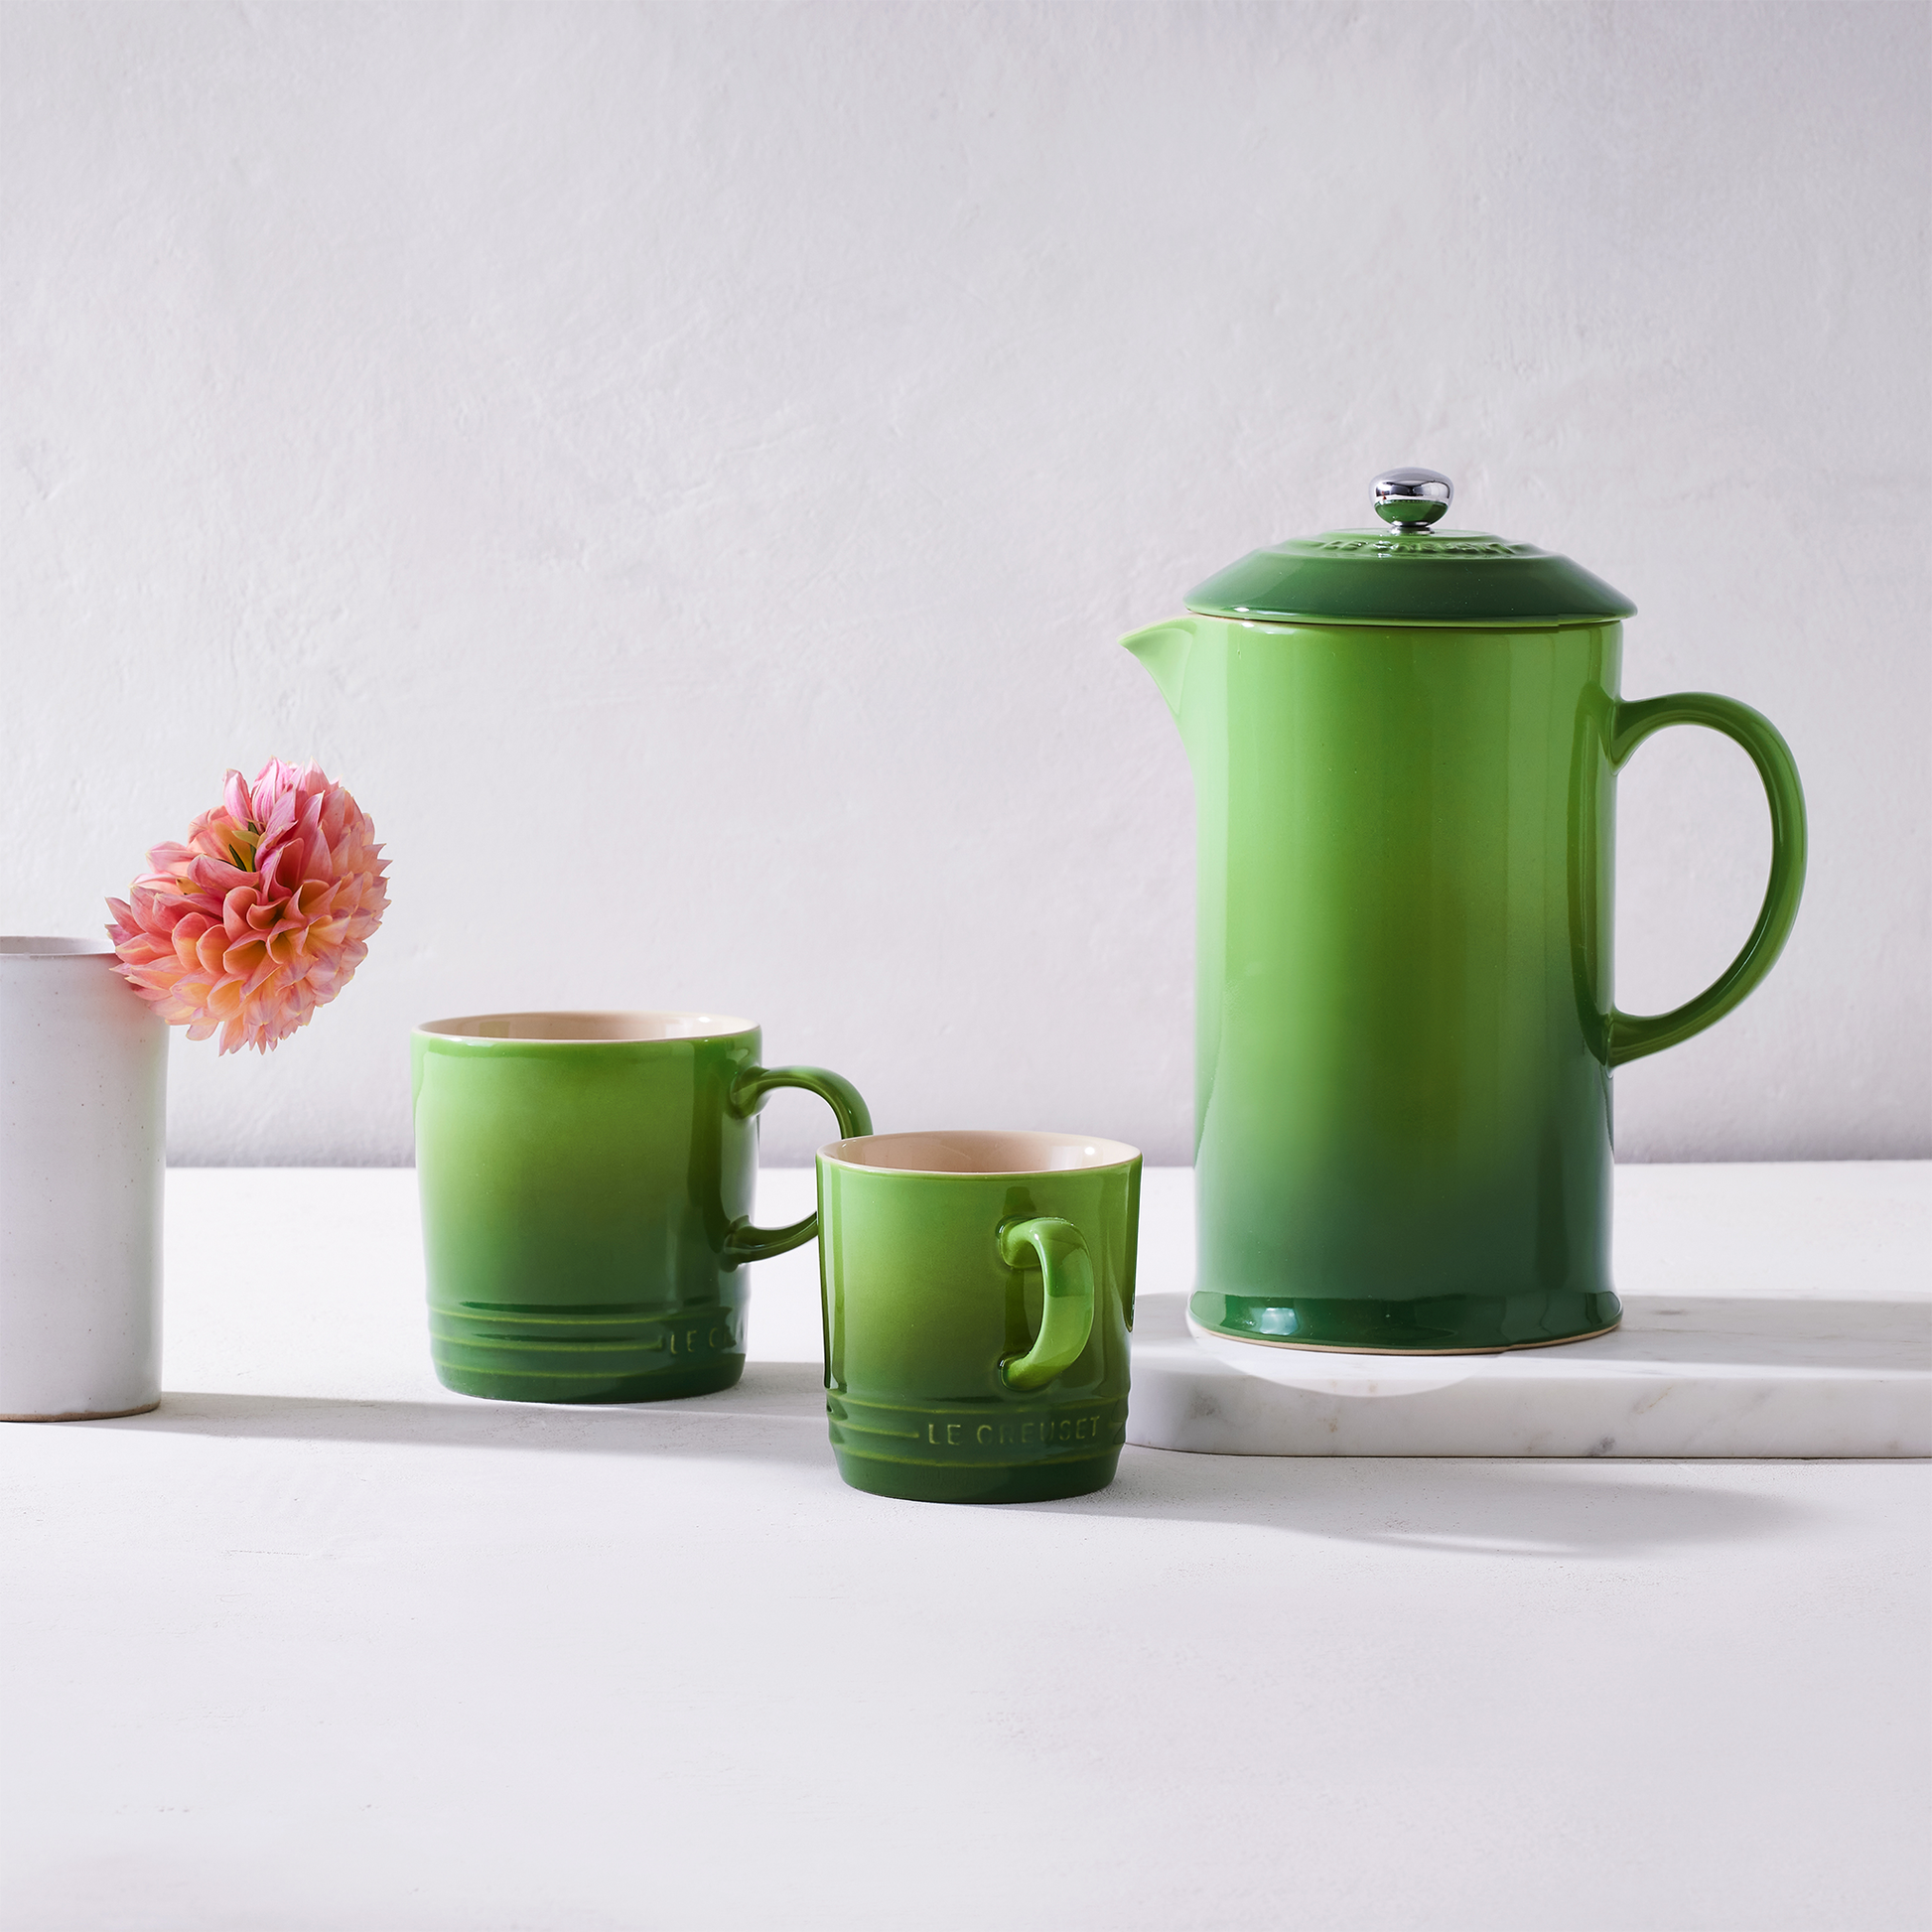 the mug show with it's larger counterpart and the matching coffee press